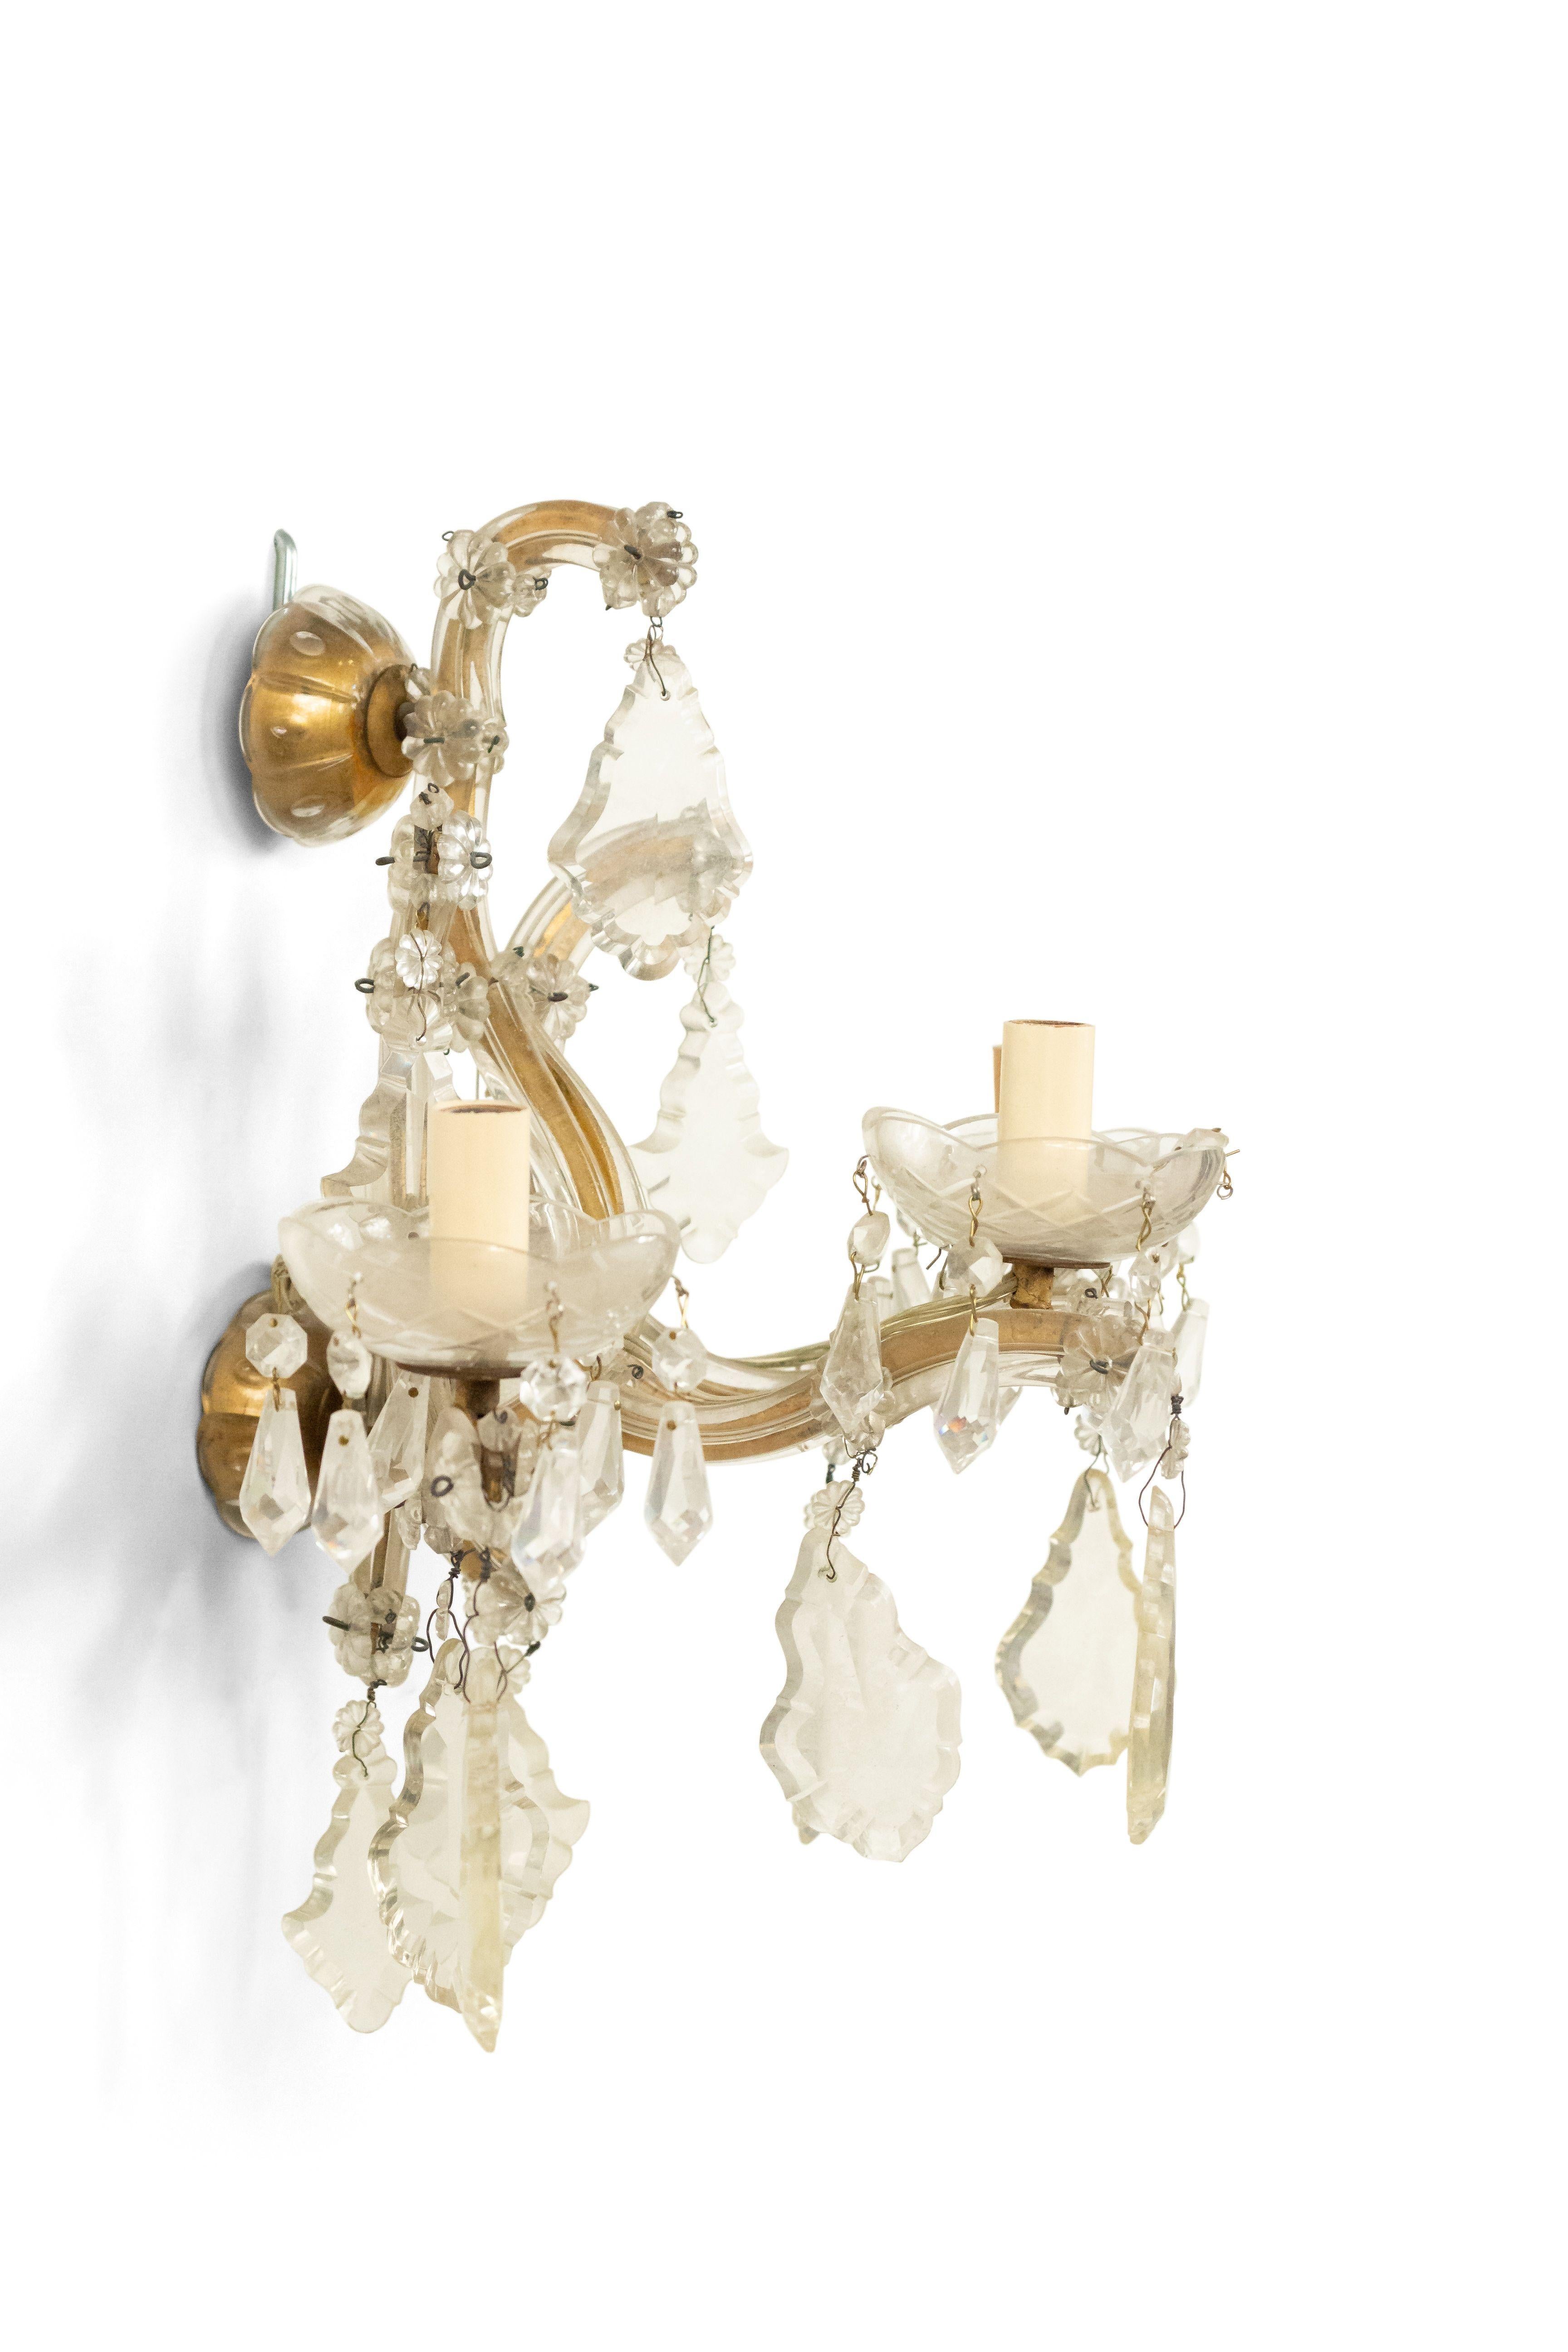 English Victorian style (20th Century) gilt metal and crystal wall sconce with three arms, dangling crystals, and etched bobeches.
 